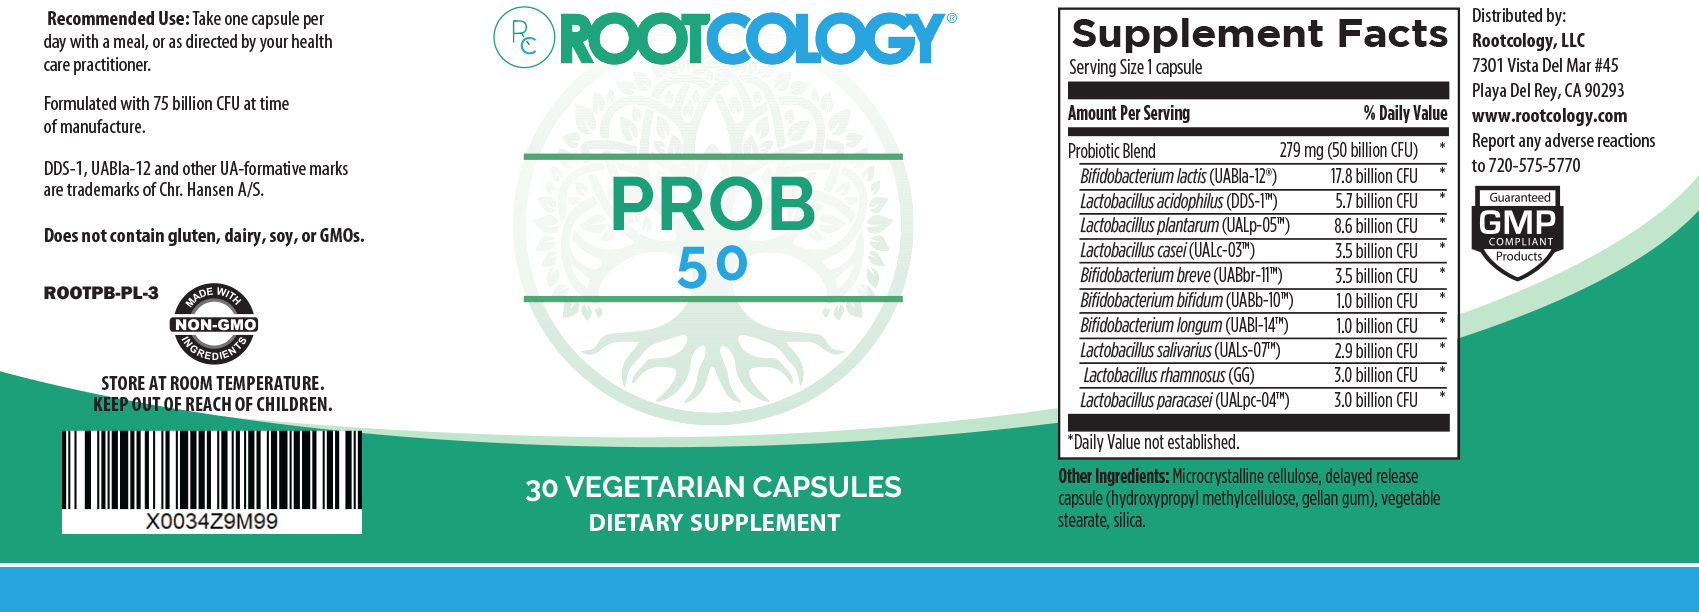 Rootcology ProB 50 Supplement Label